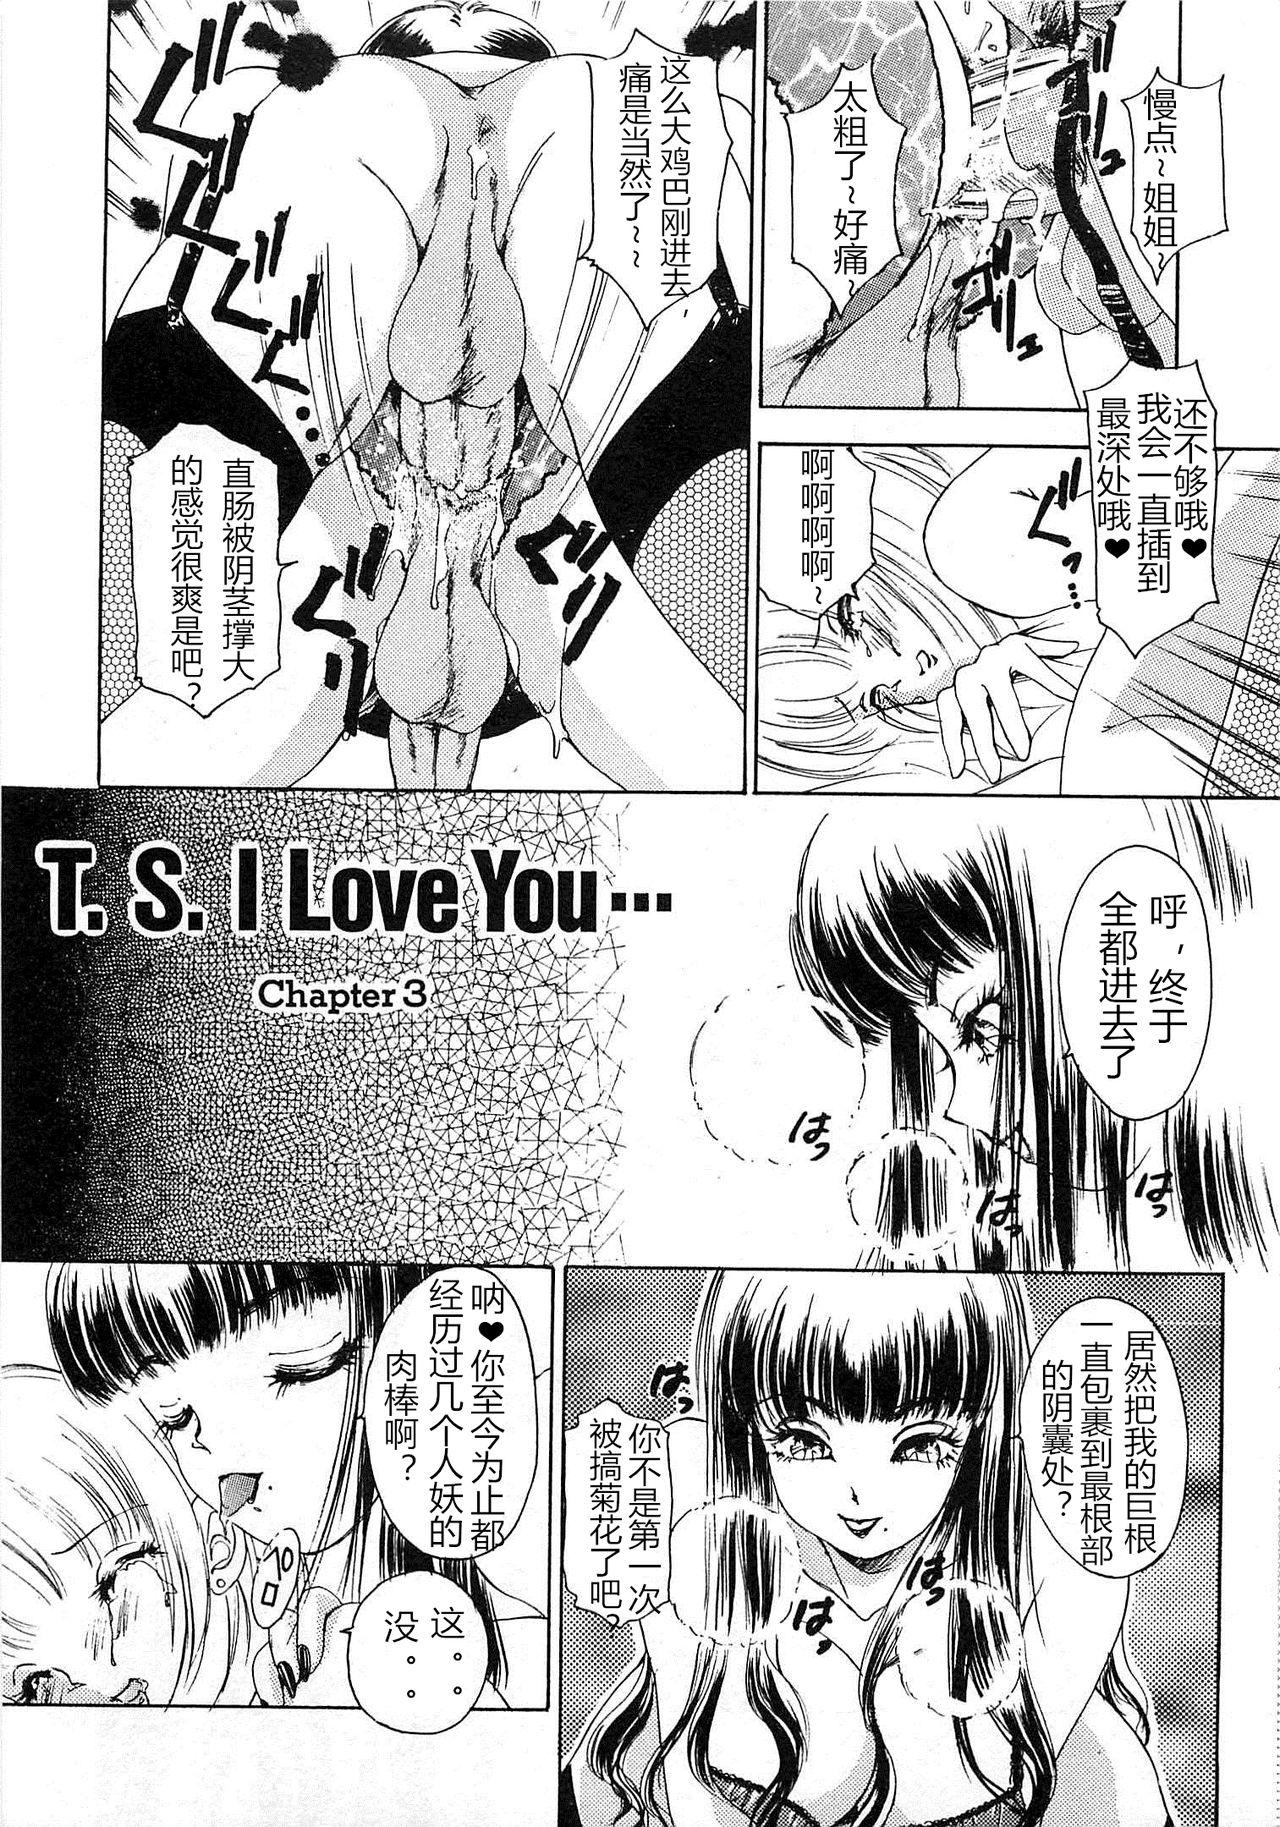 T.S. I LOVE YOU chapter 03 1